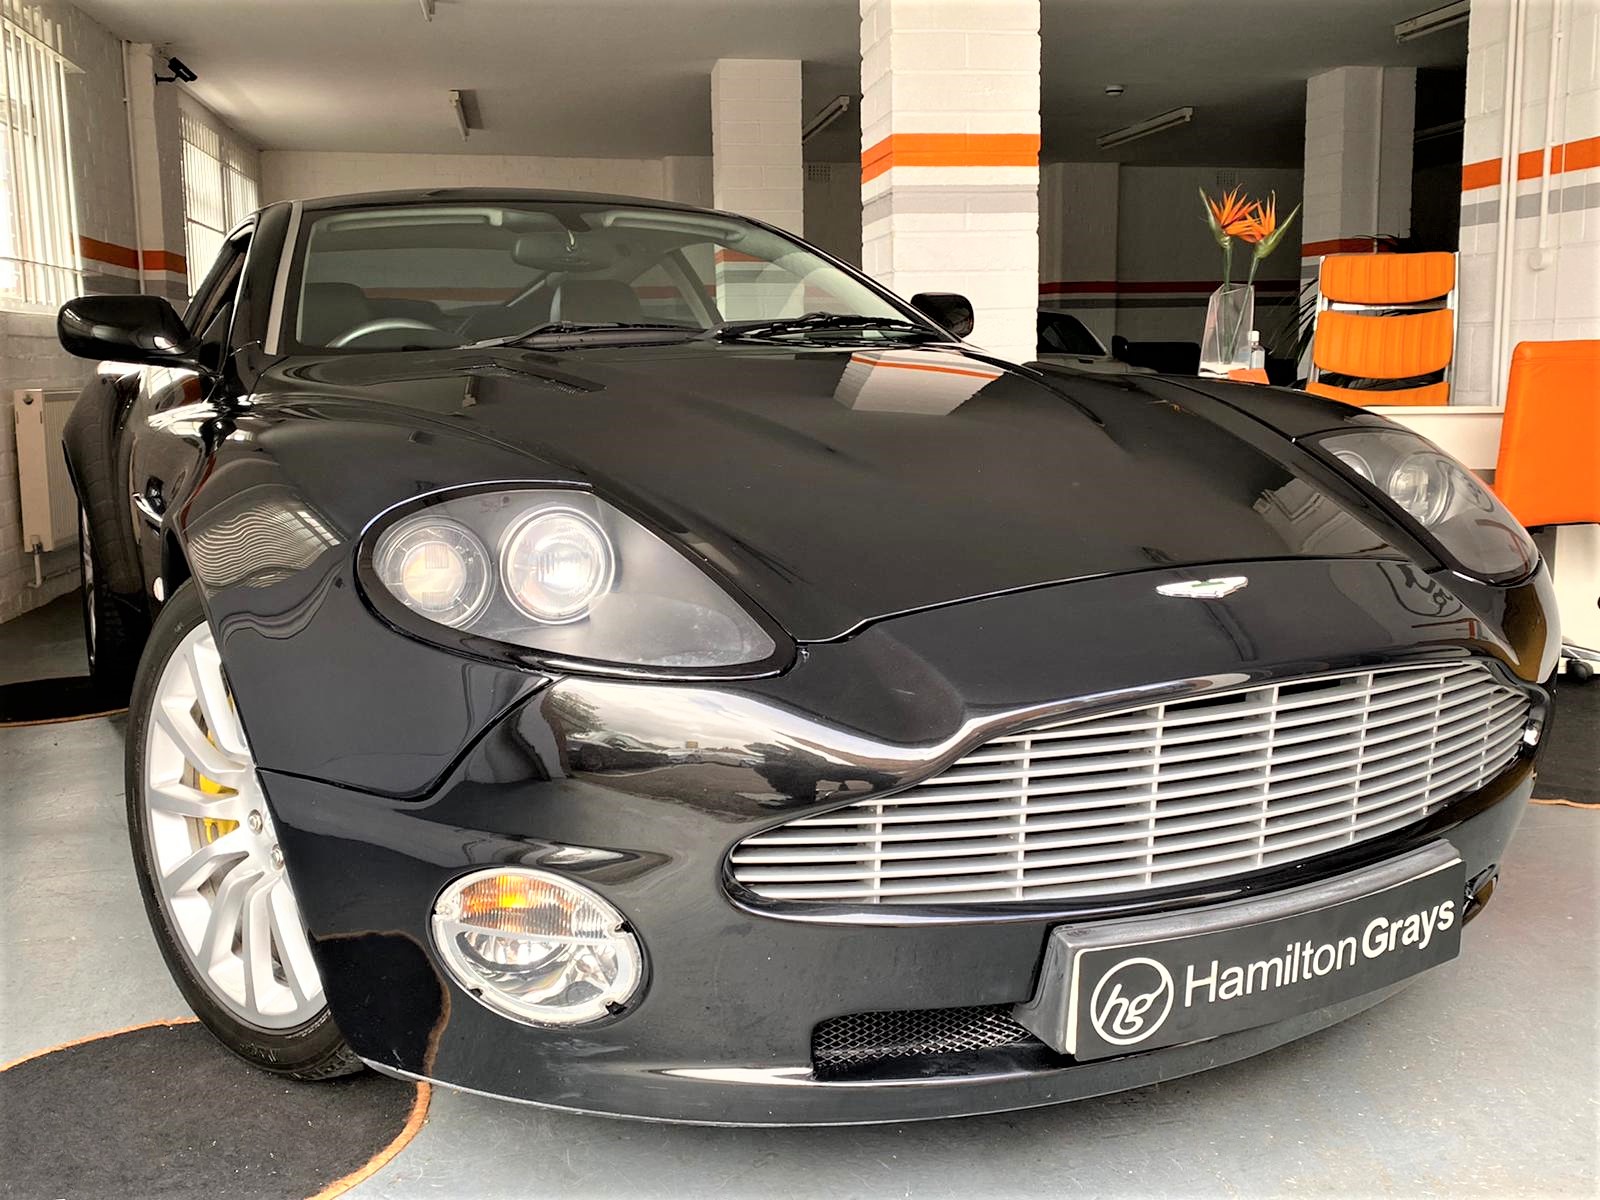 2003 (03) Aston Martin Vanquish 5.9 V12 Auto’ Coupe. In Obsidian Black with Full Black Hide Upholstery. 39k. ‘Old School Magic’.. (SOLD)